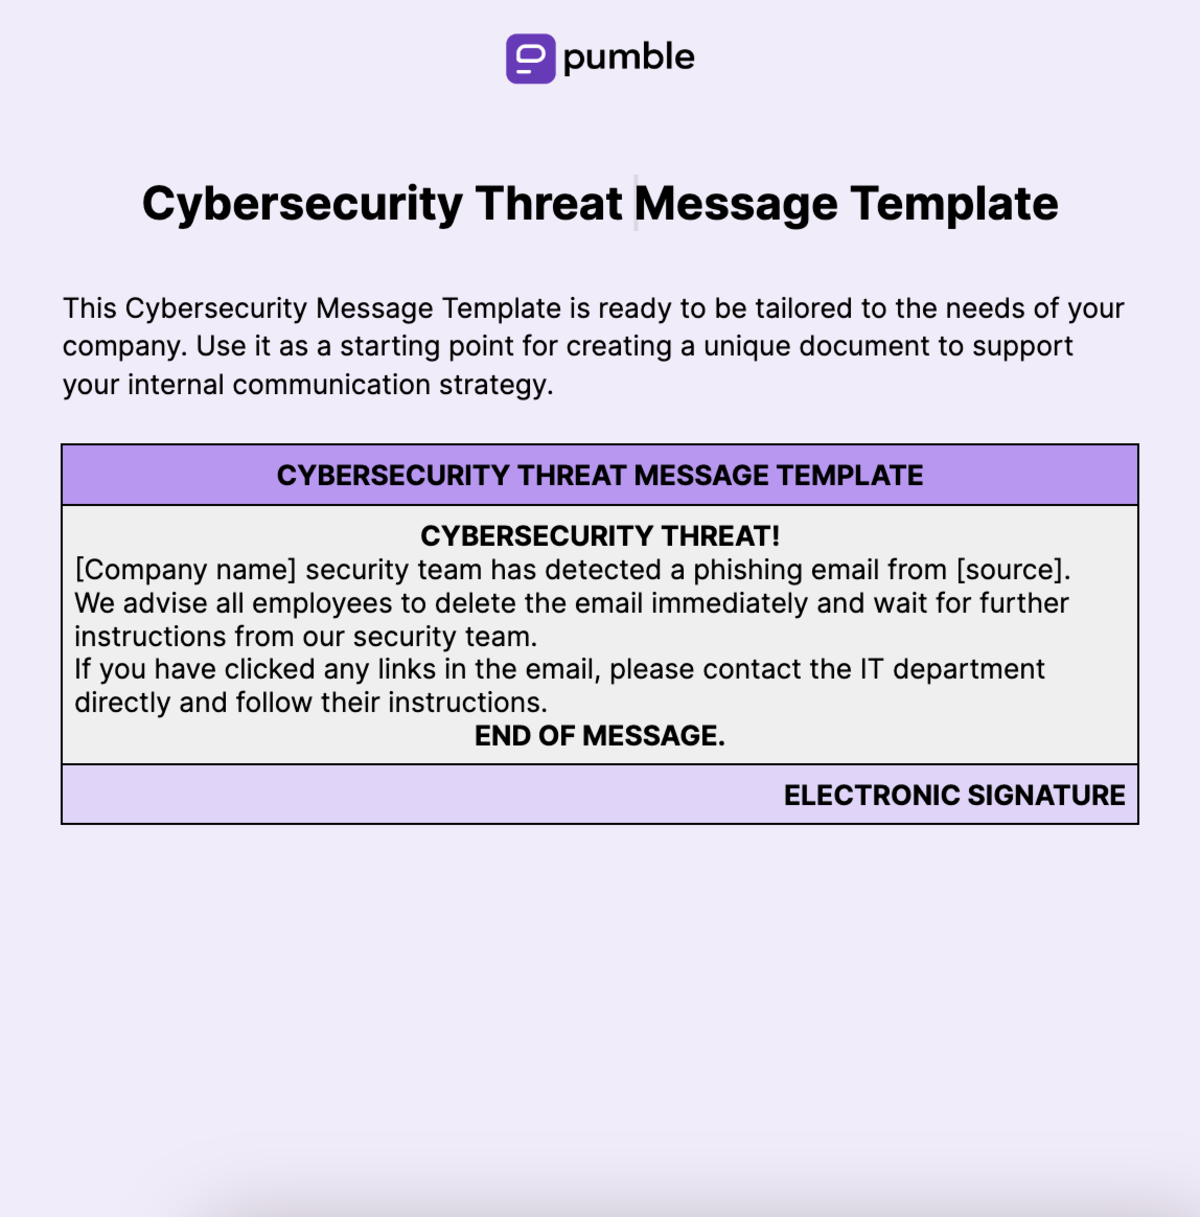 Cybersecurity Threat Message Template